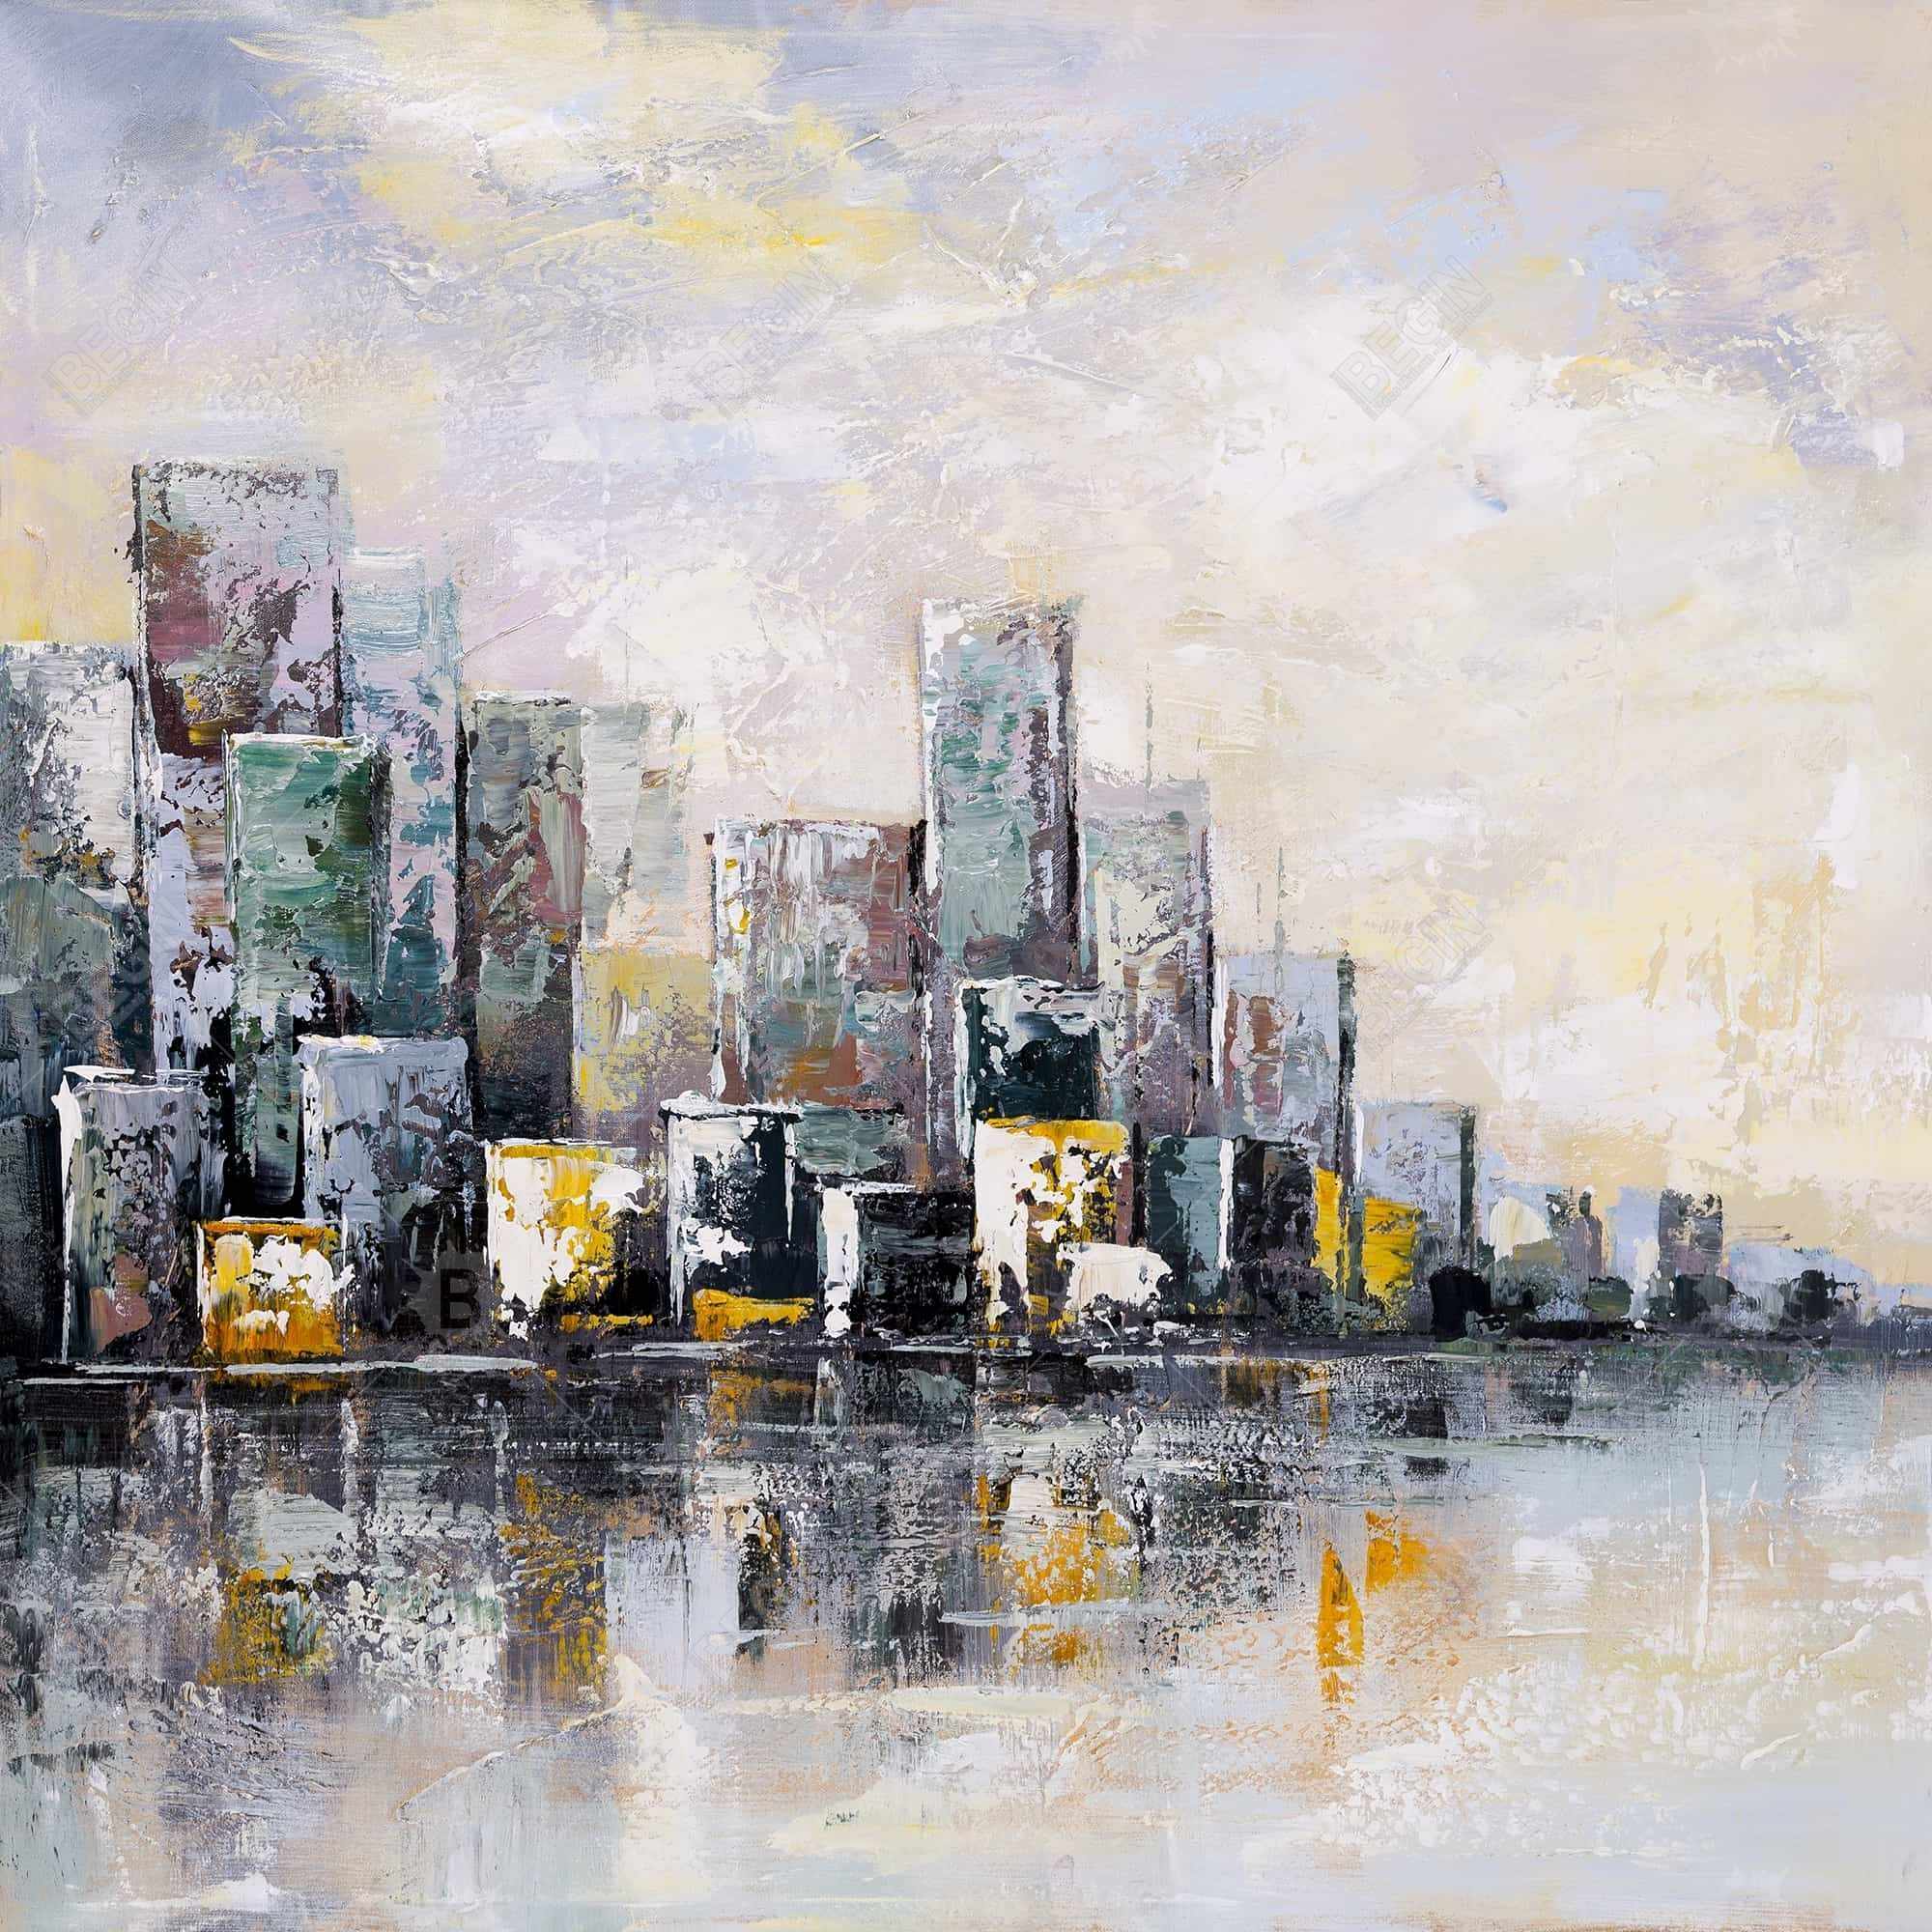 Abstract cityscape in the morning